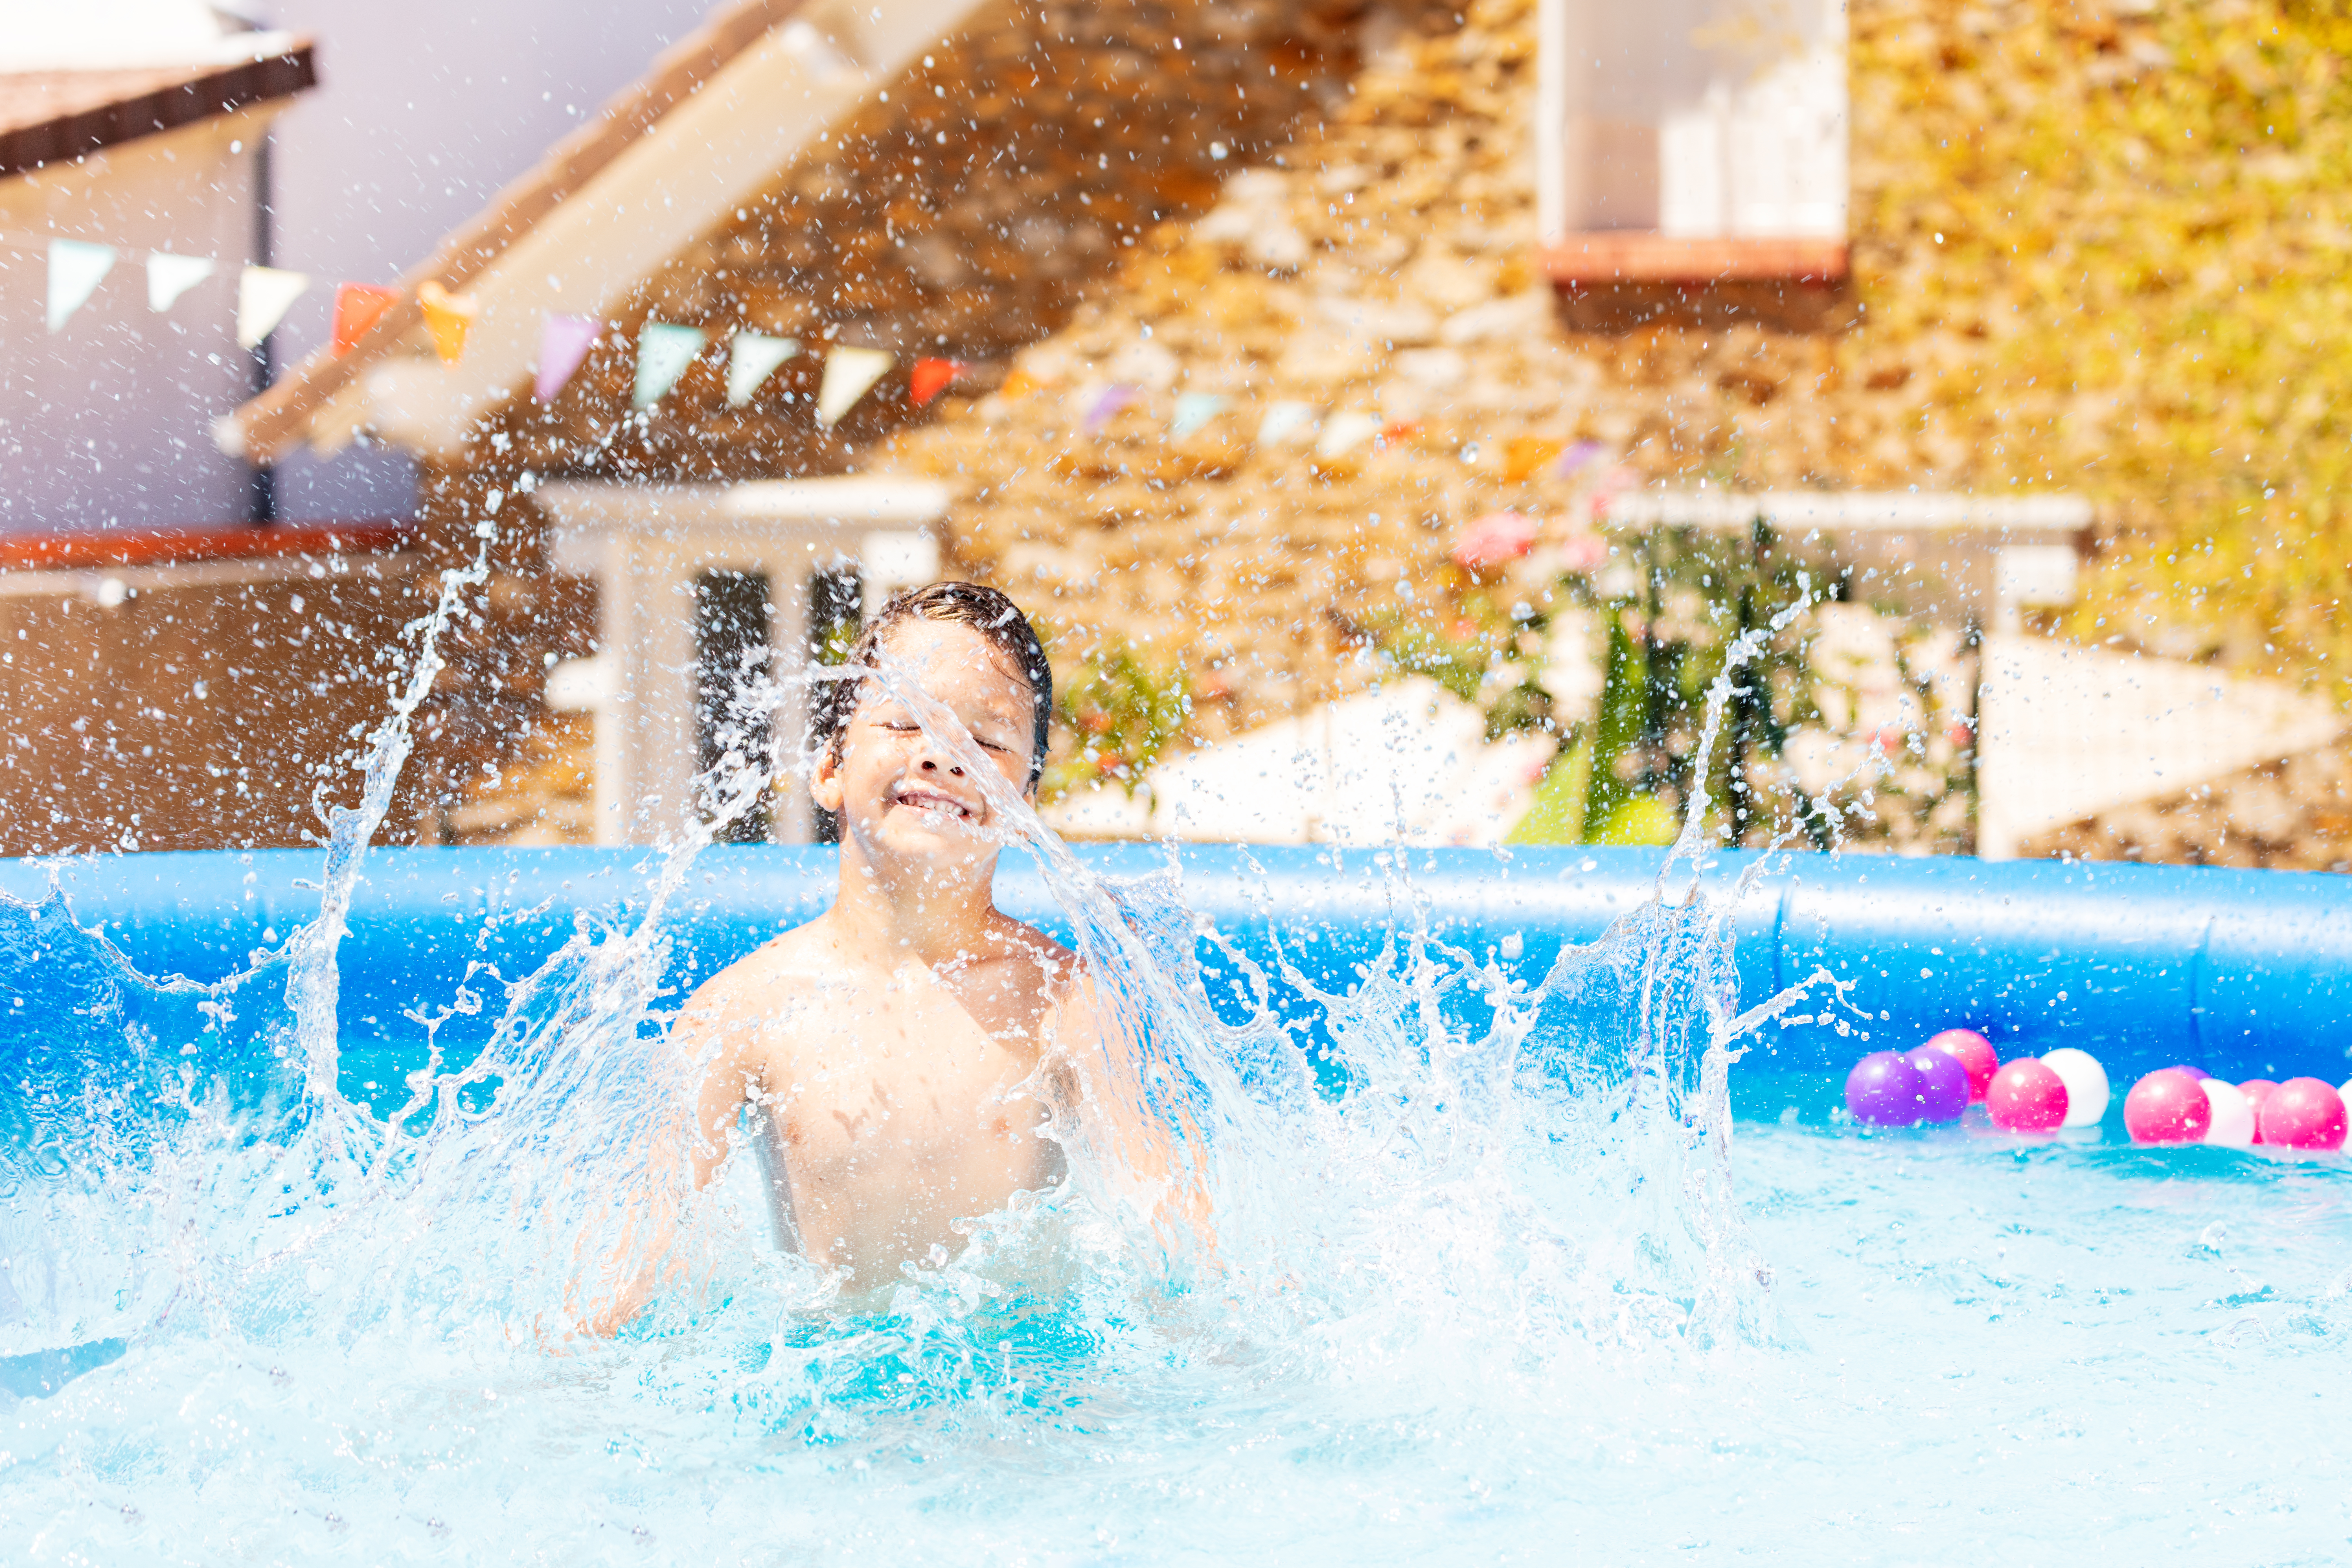 A child joyfully splashing in a pool, creating ripples in the water as they play and have fun in the refreshing pool.